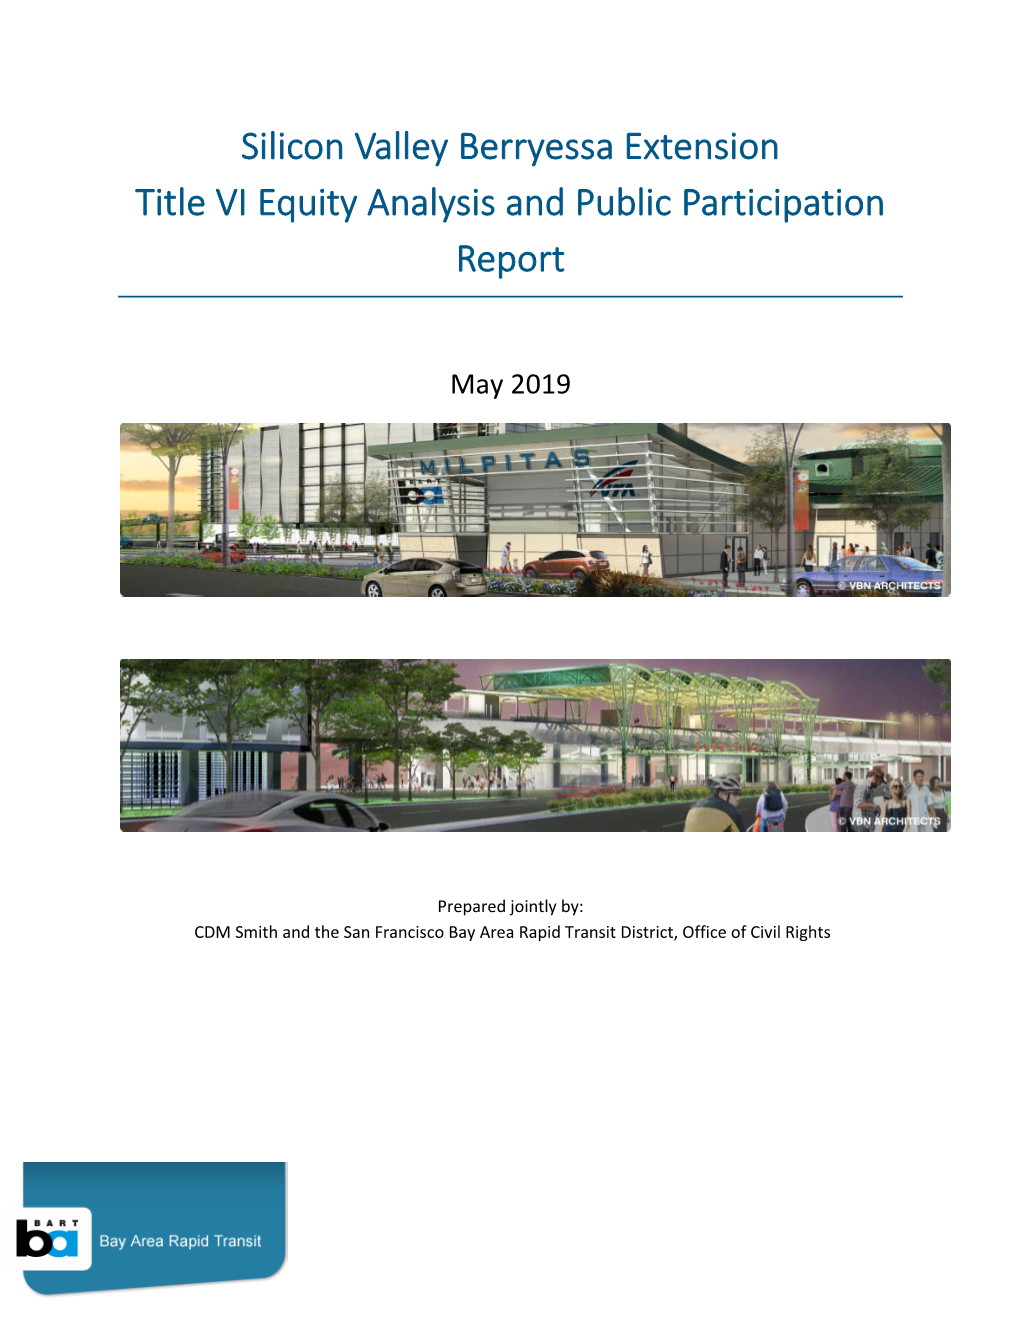 Silicon Valley Berryessa Extension Title VI Equity Analysis and Public Participation Report